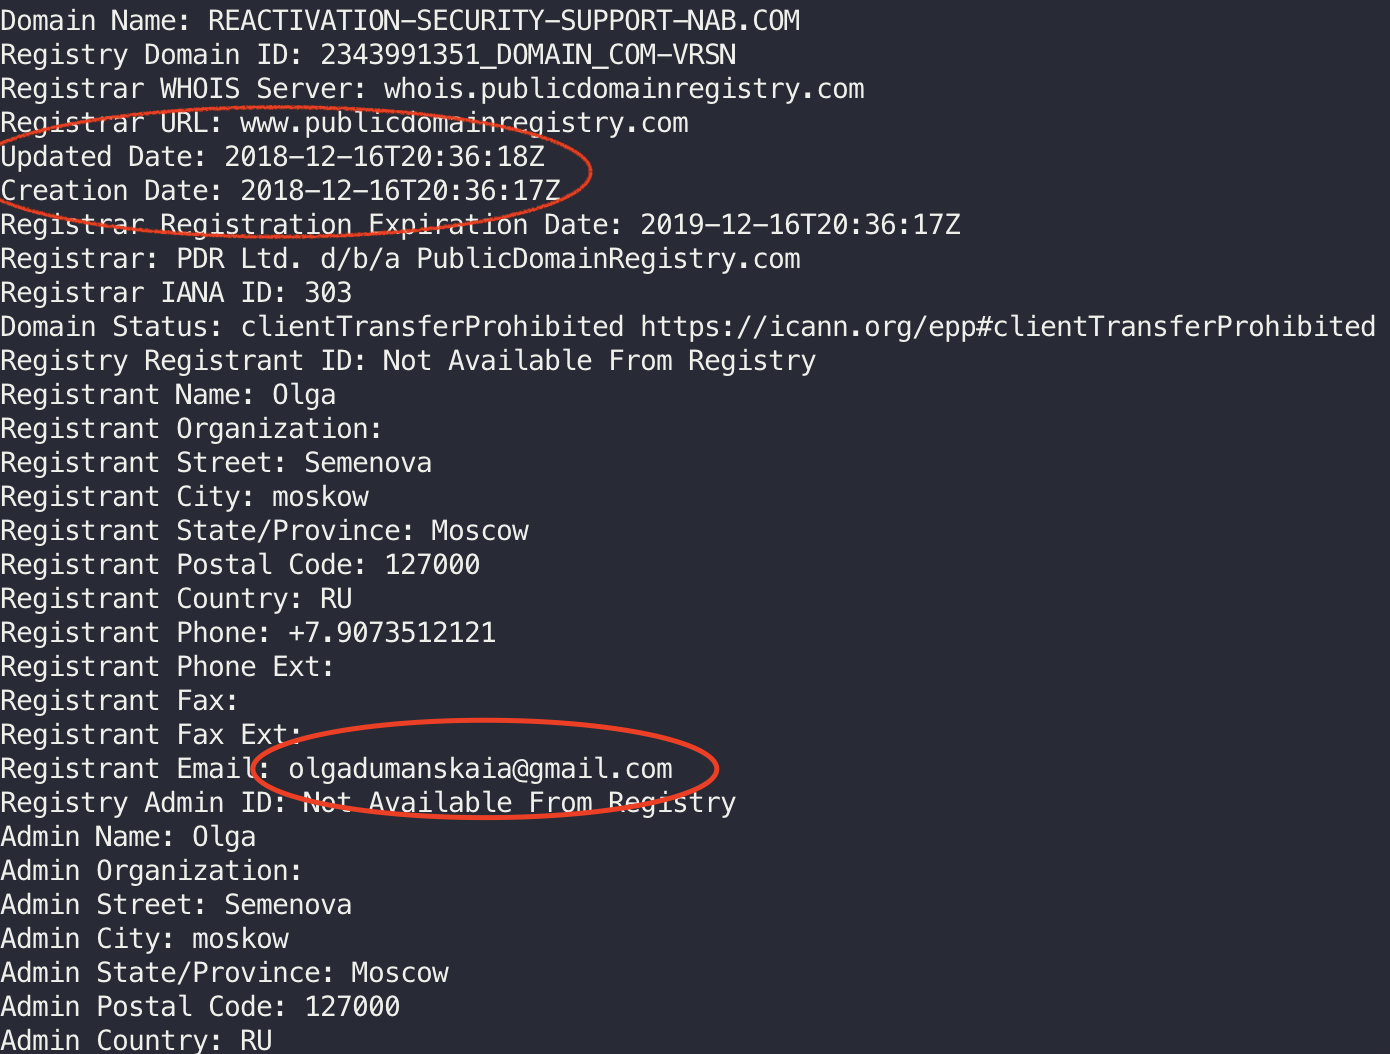 Results of the command: whois reactivation-security-support-nab.com